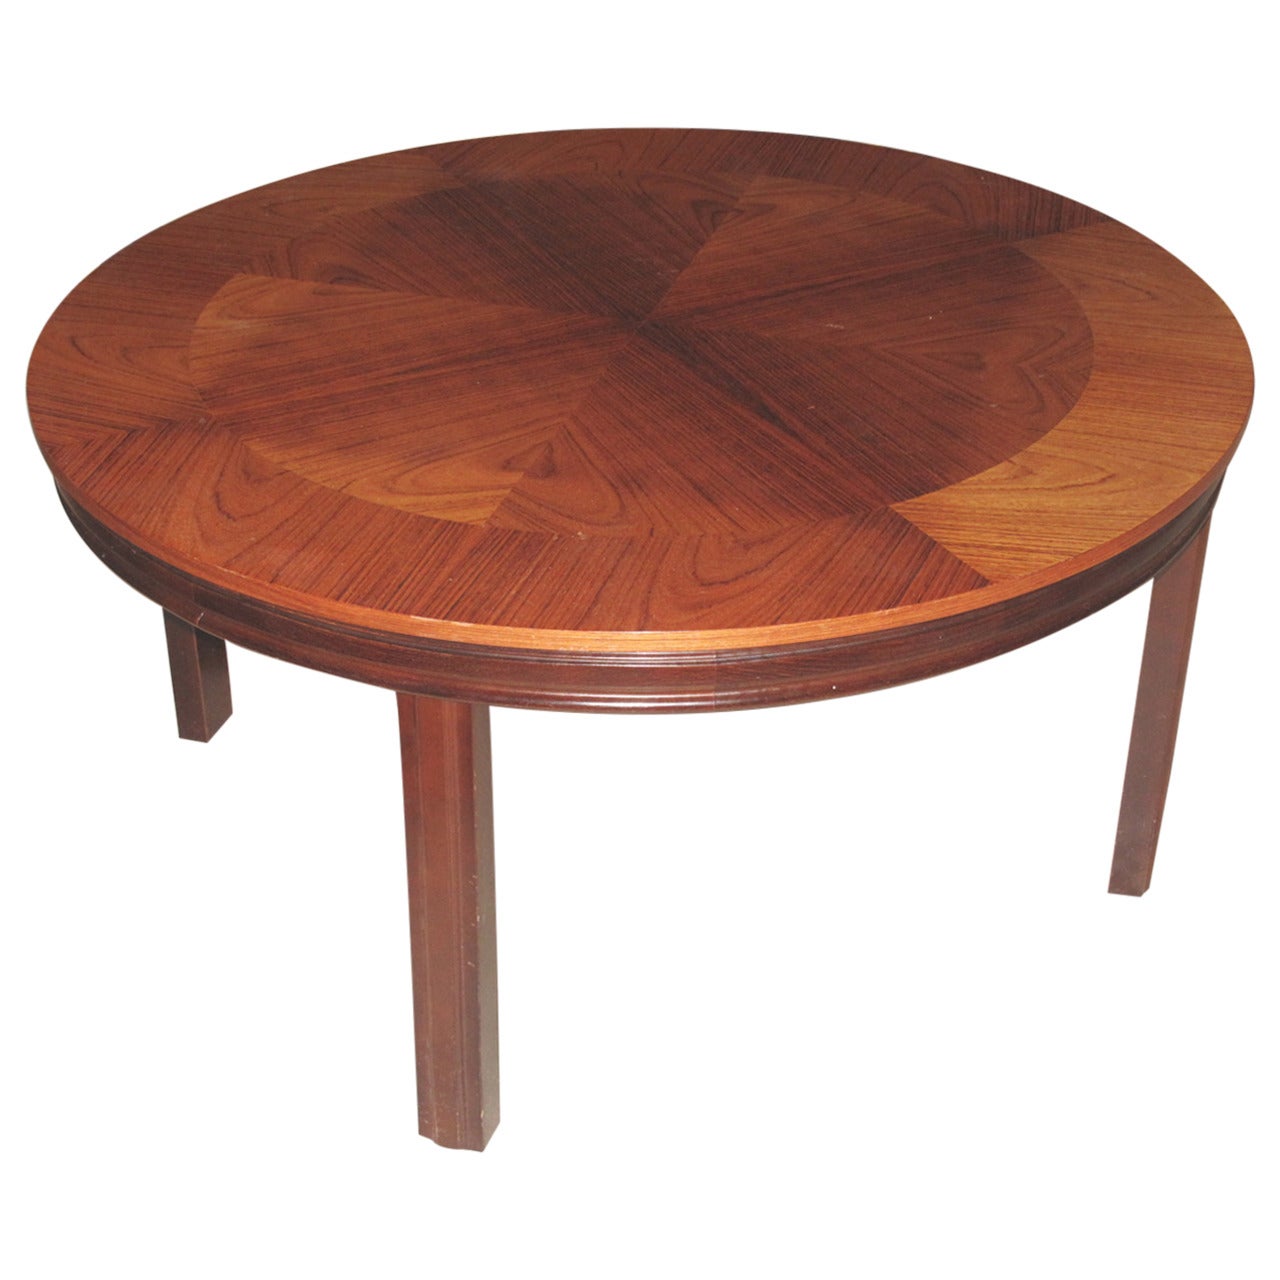 Danish Mahogany Circular Coffee or Low Table with Patterned Top